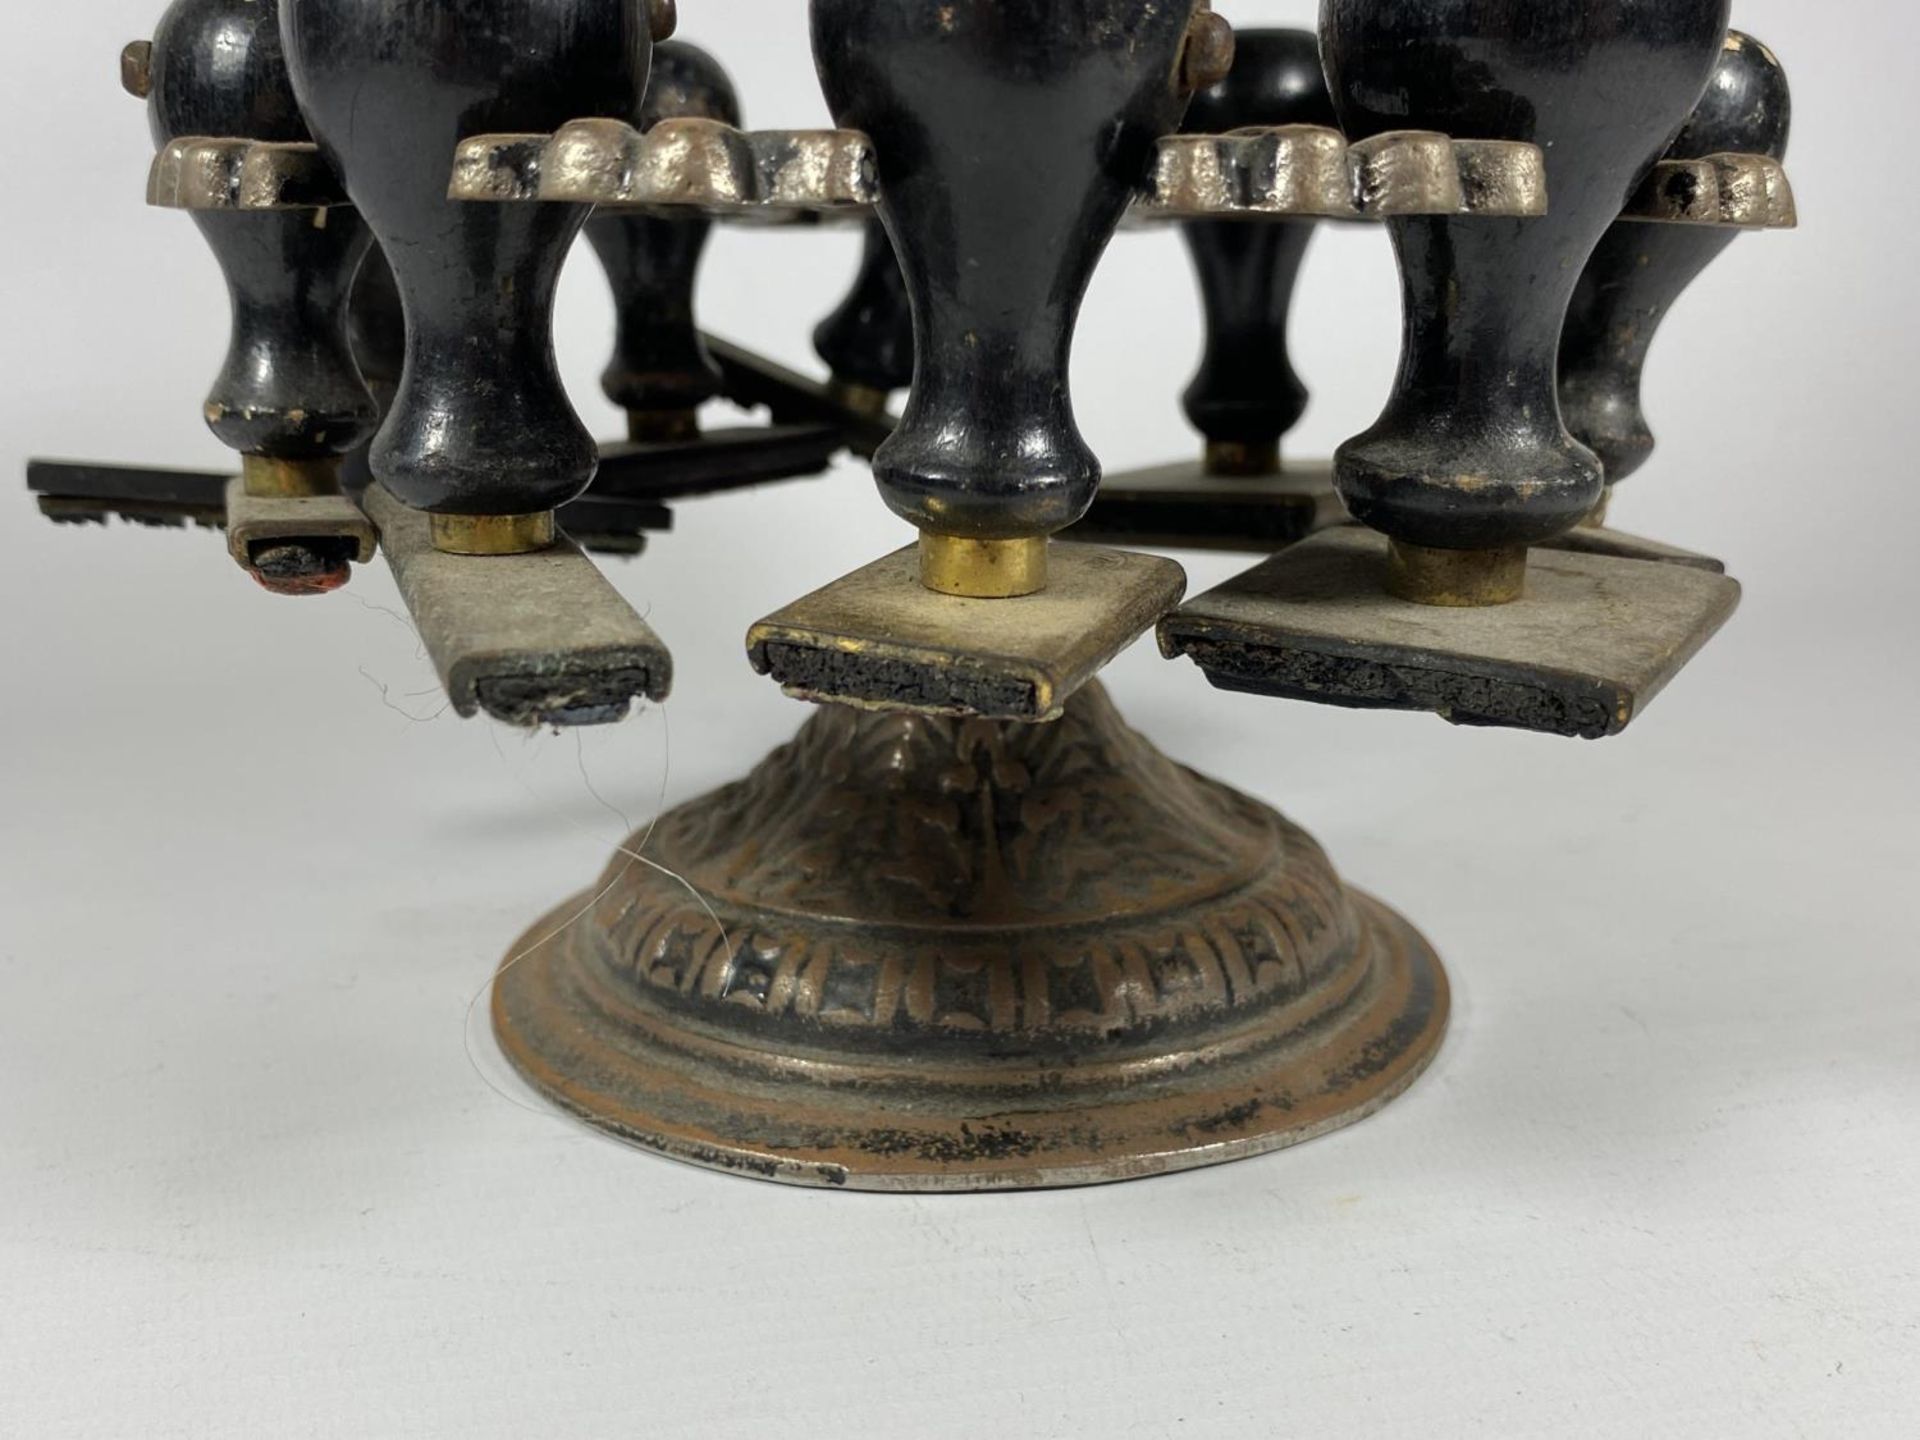 AN UNUSUAL 19TH CENTURY BRASS TWO TIER REVOLVING STAMP HOLDER WITH ORIGINAL EBONY HANDLED STAMPS, - Image 2 of 4